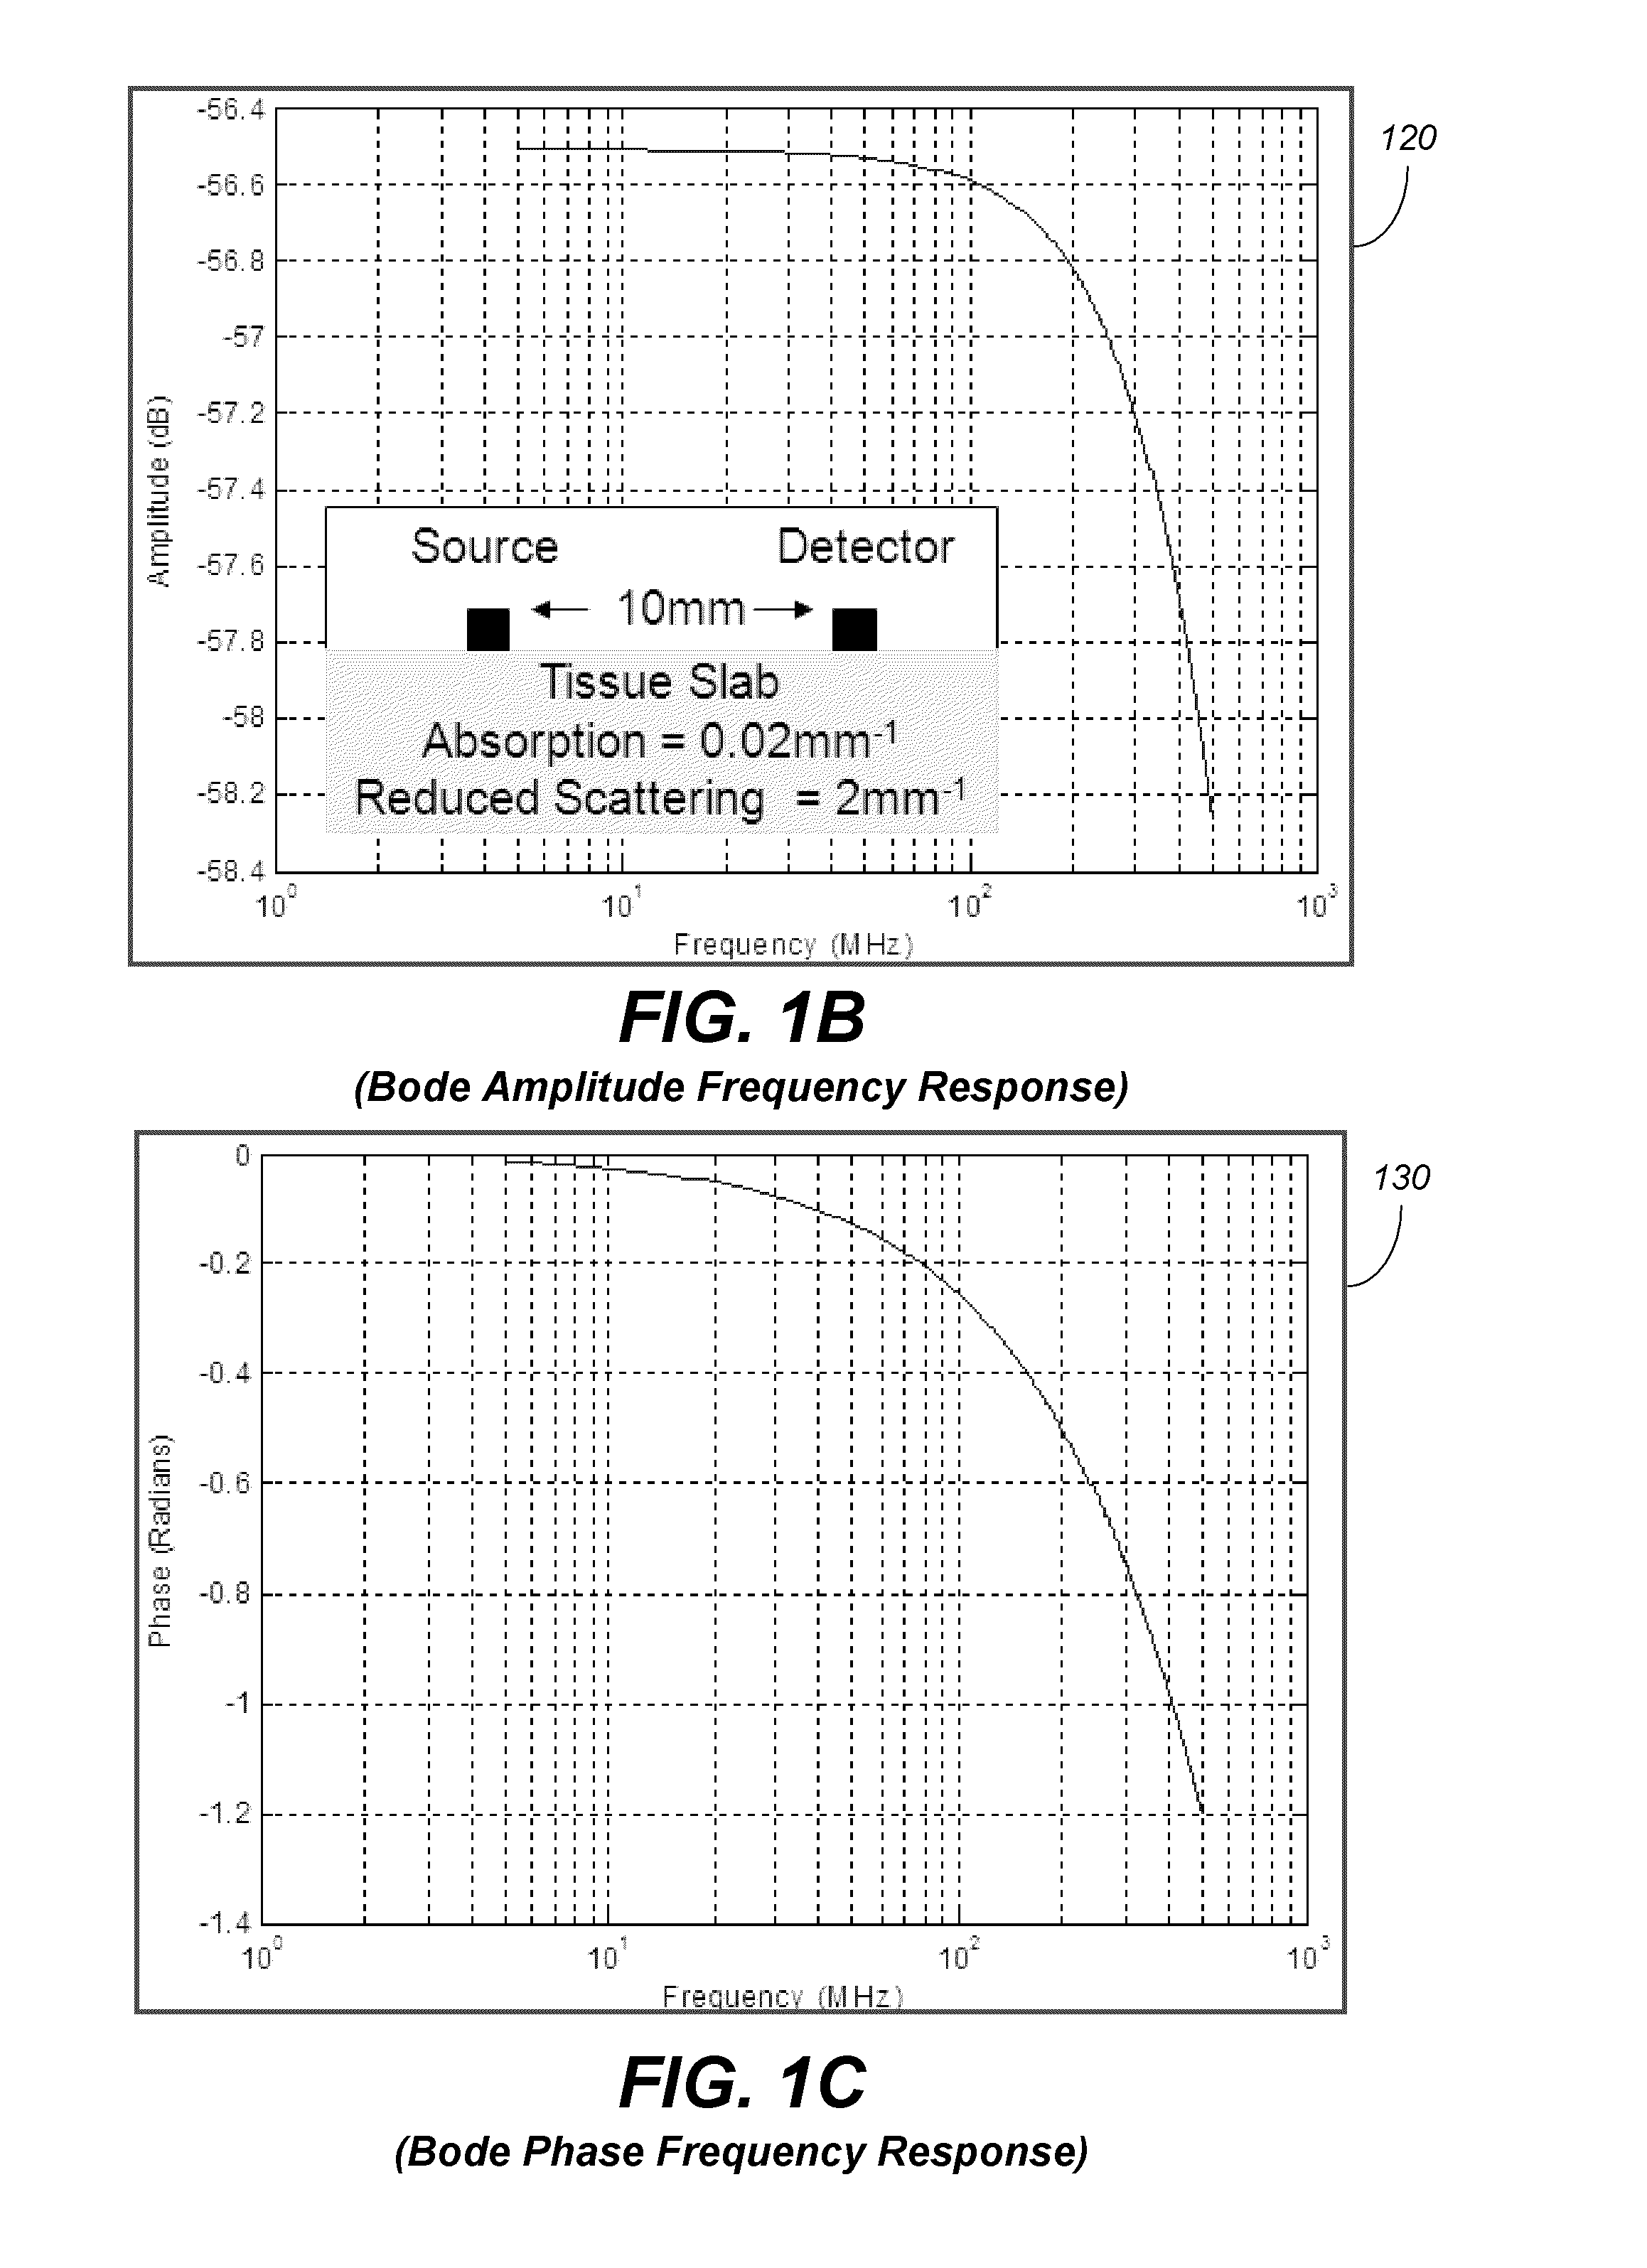 Systems and methods of monitoring a patient through frequency-domain photo migration spectroscopy